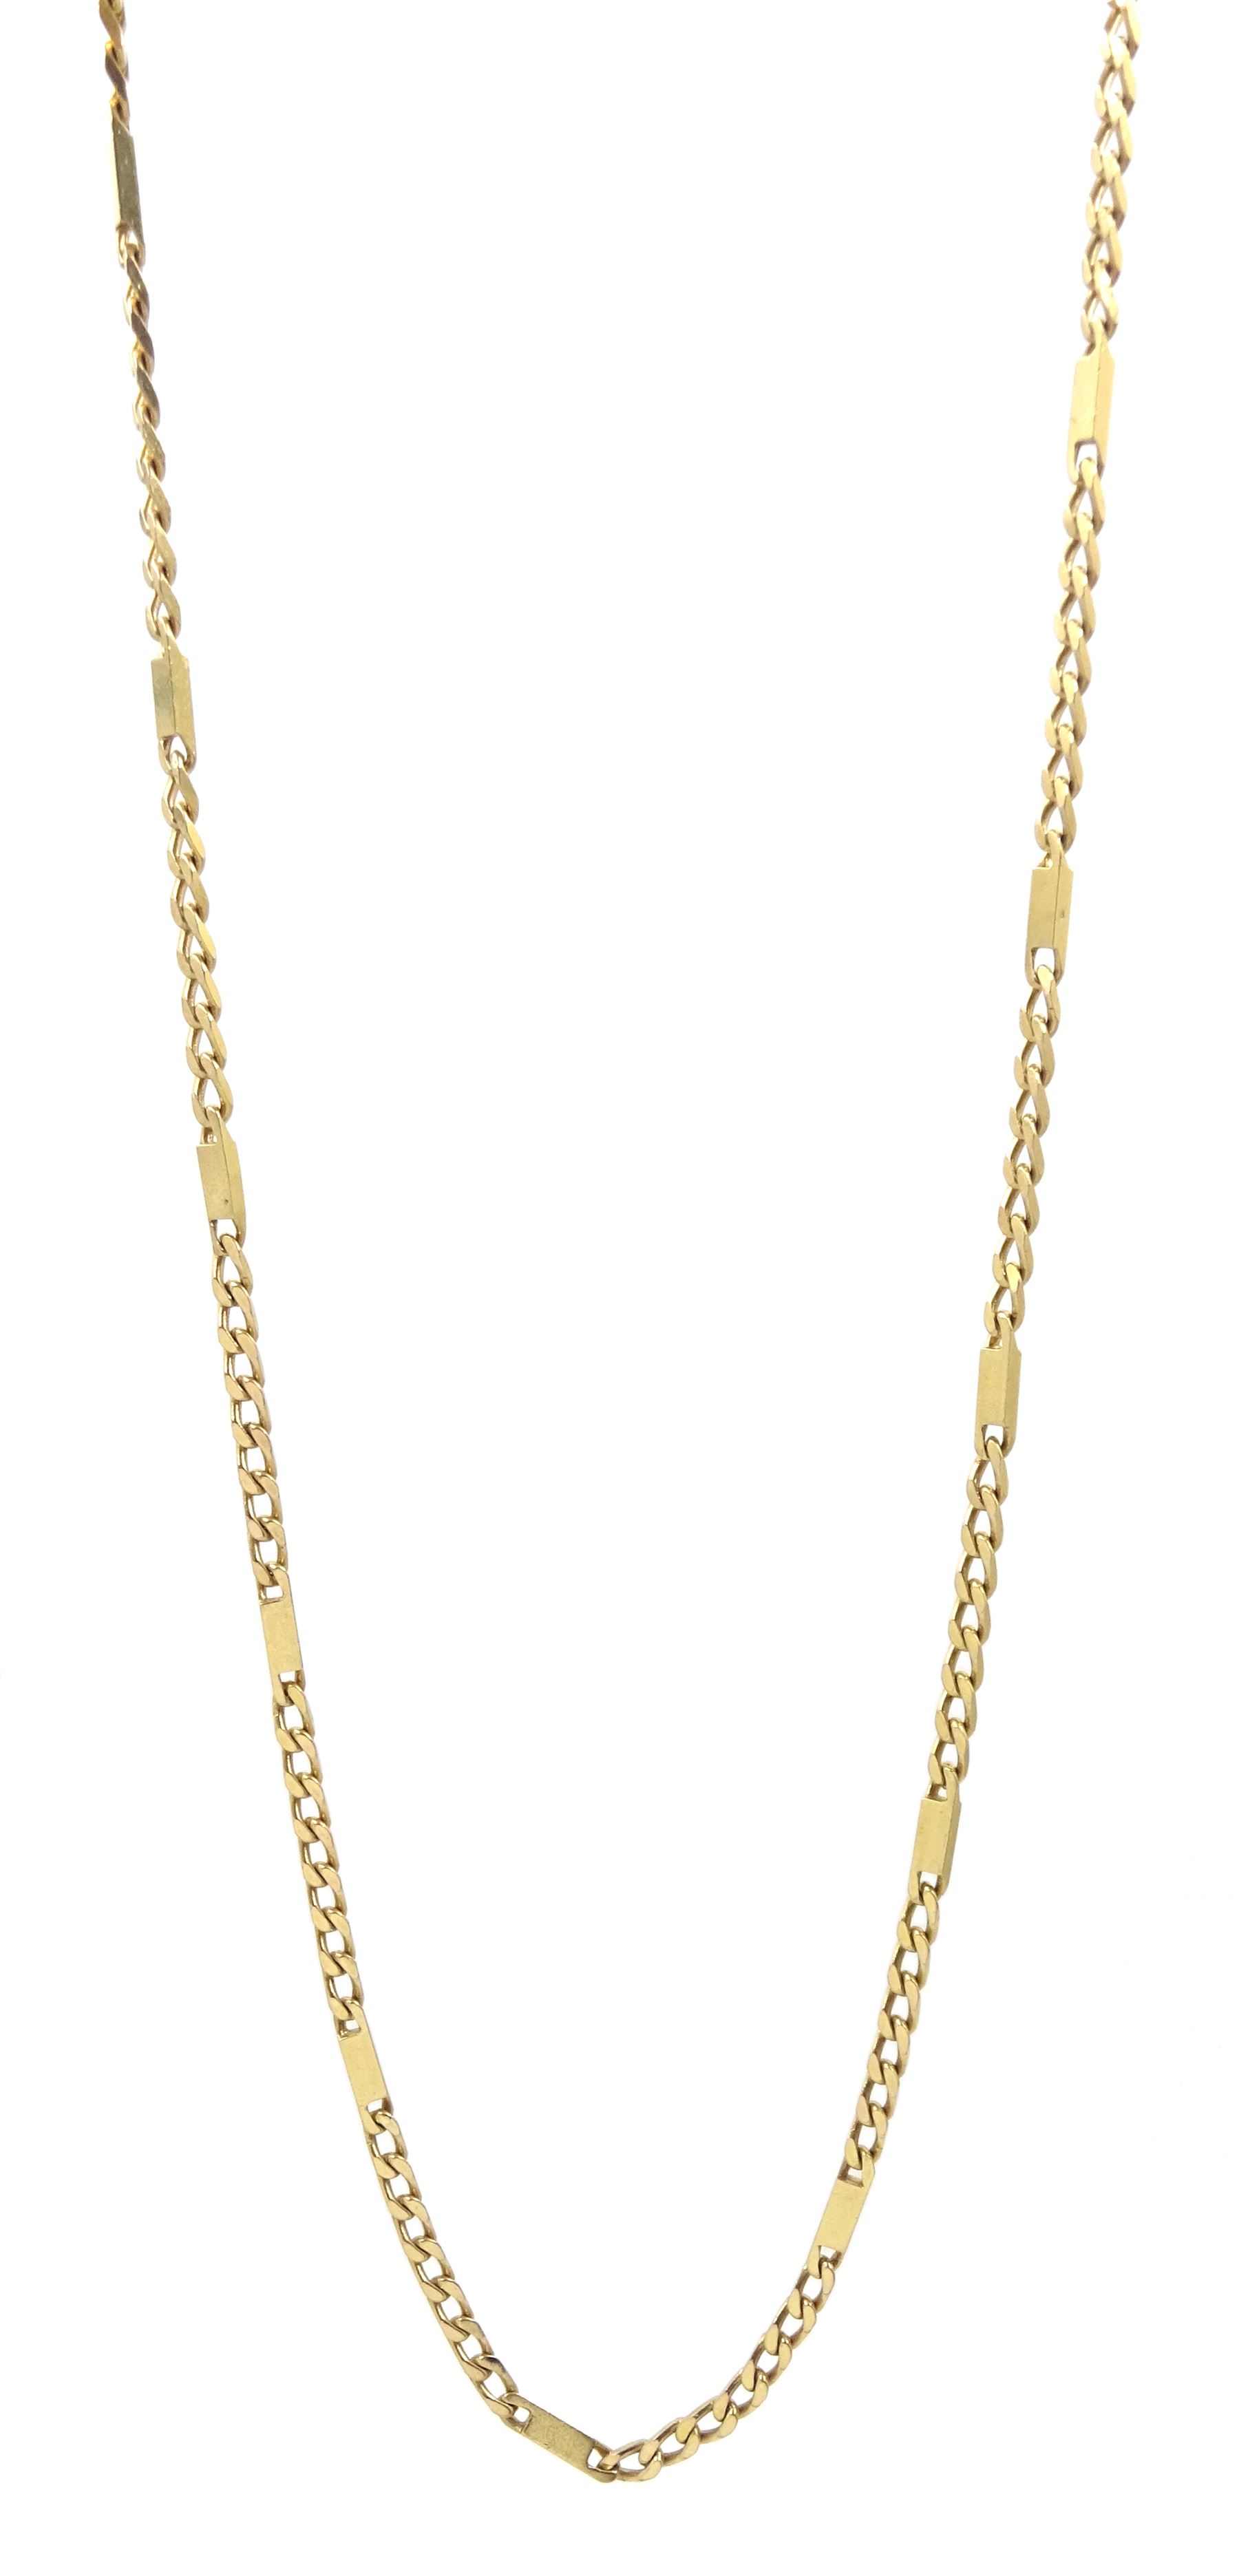 9ct gold fancy Figaro link necklace